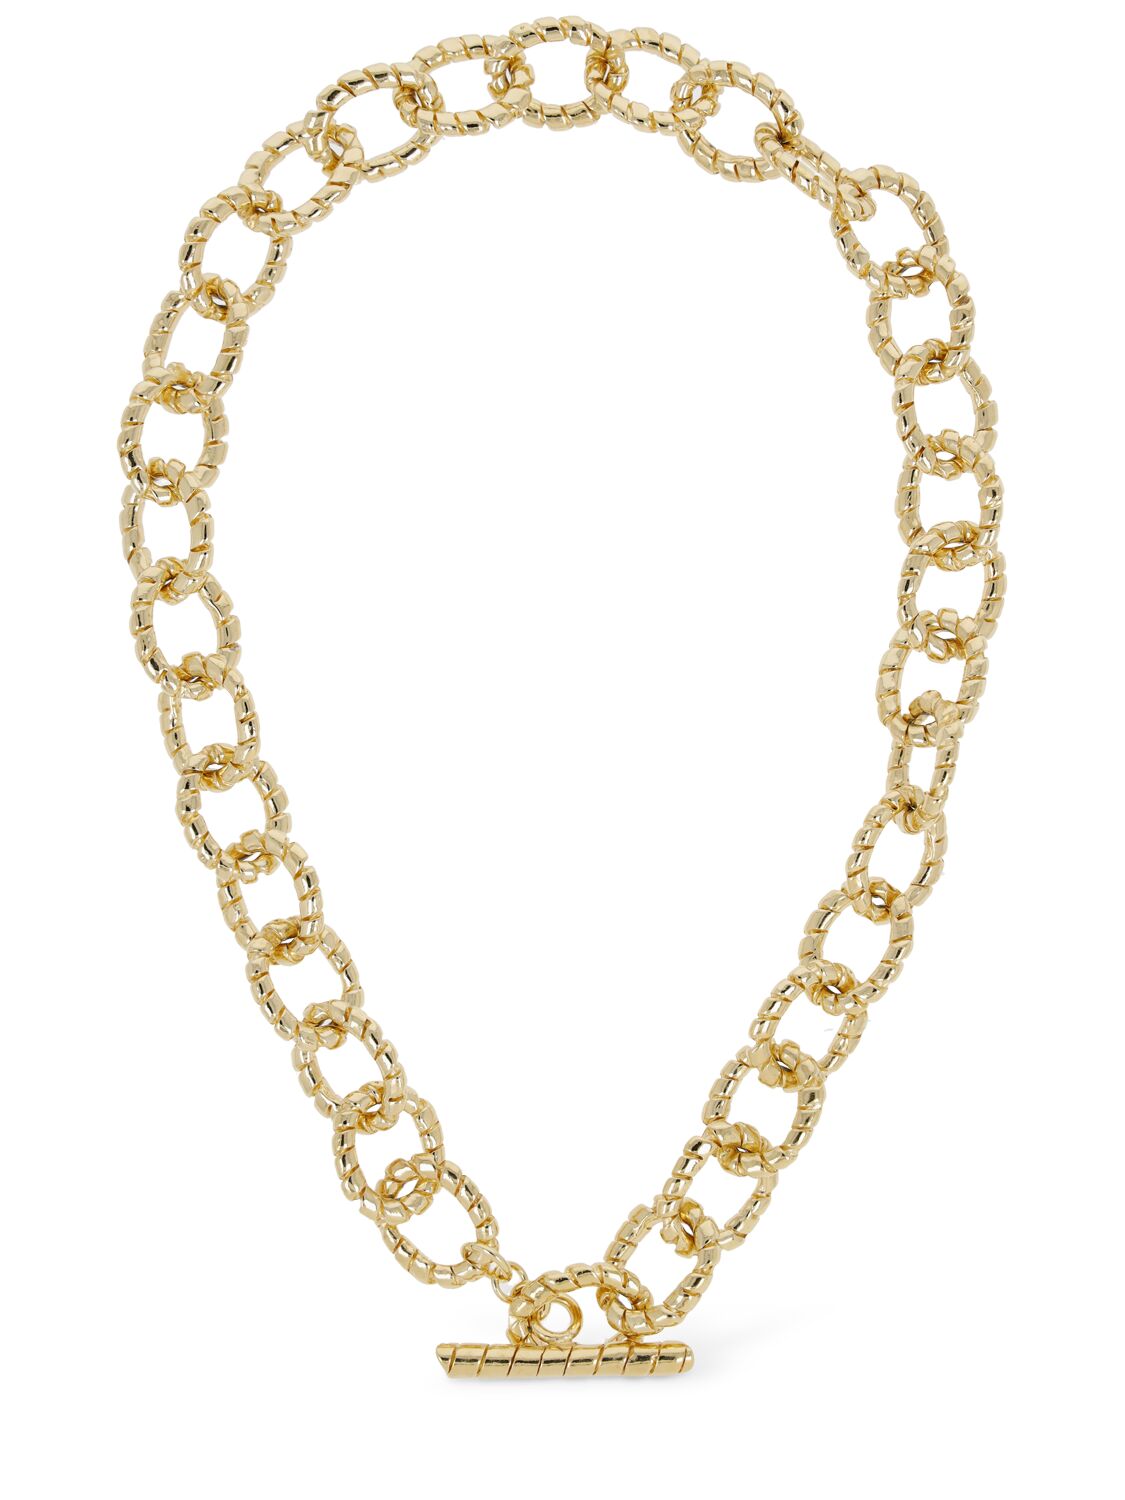 Cress Chain Collar Necklace